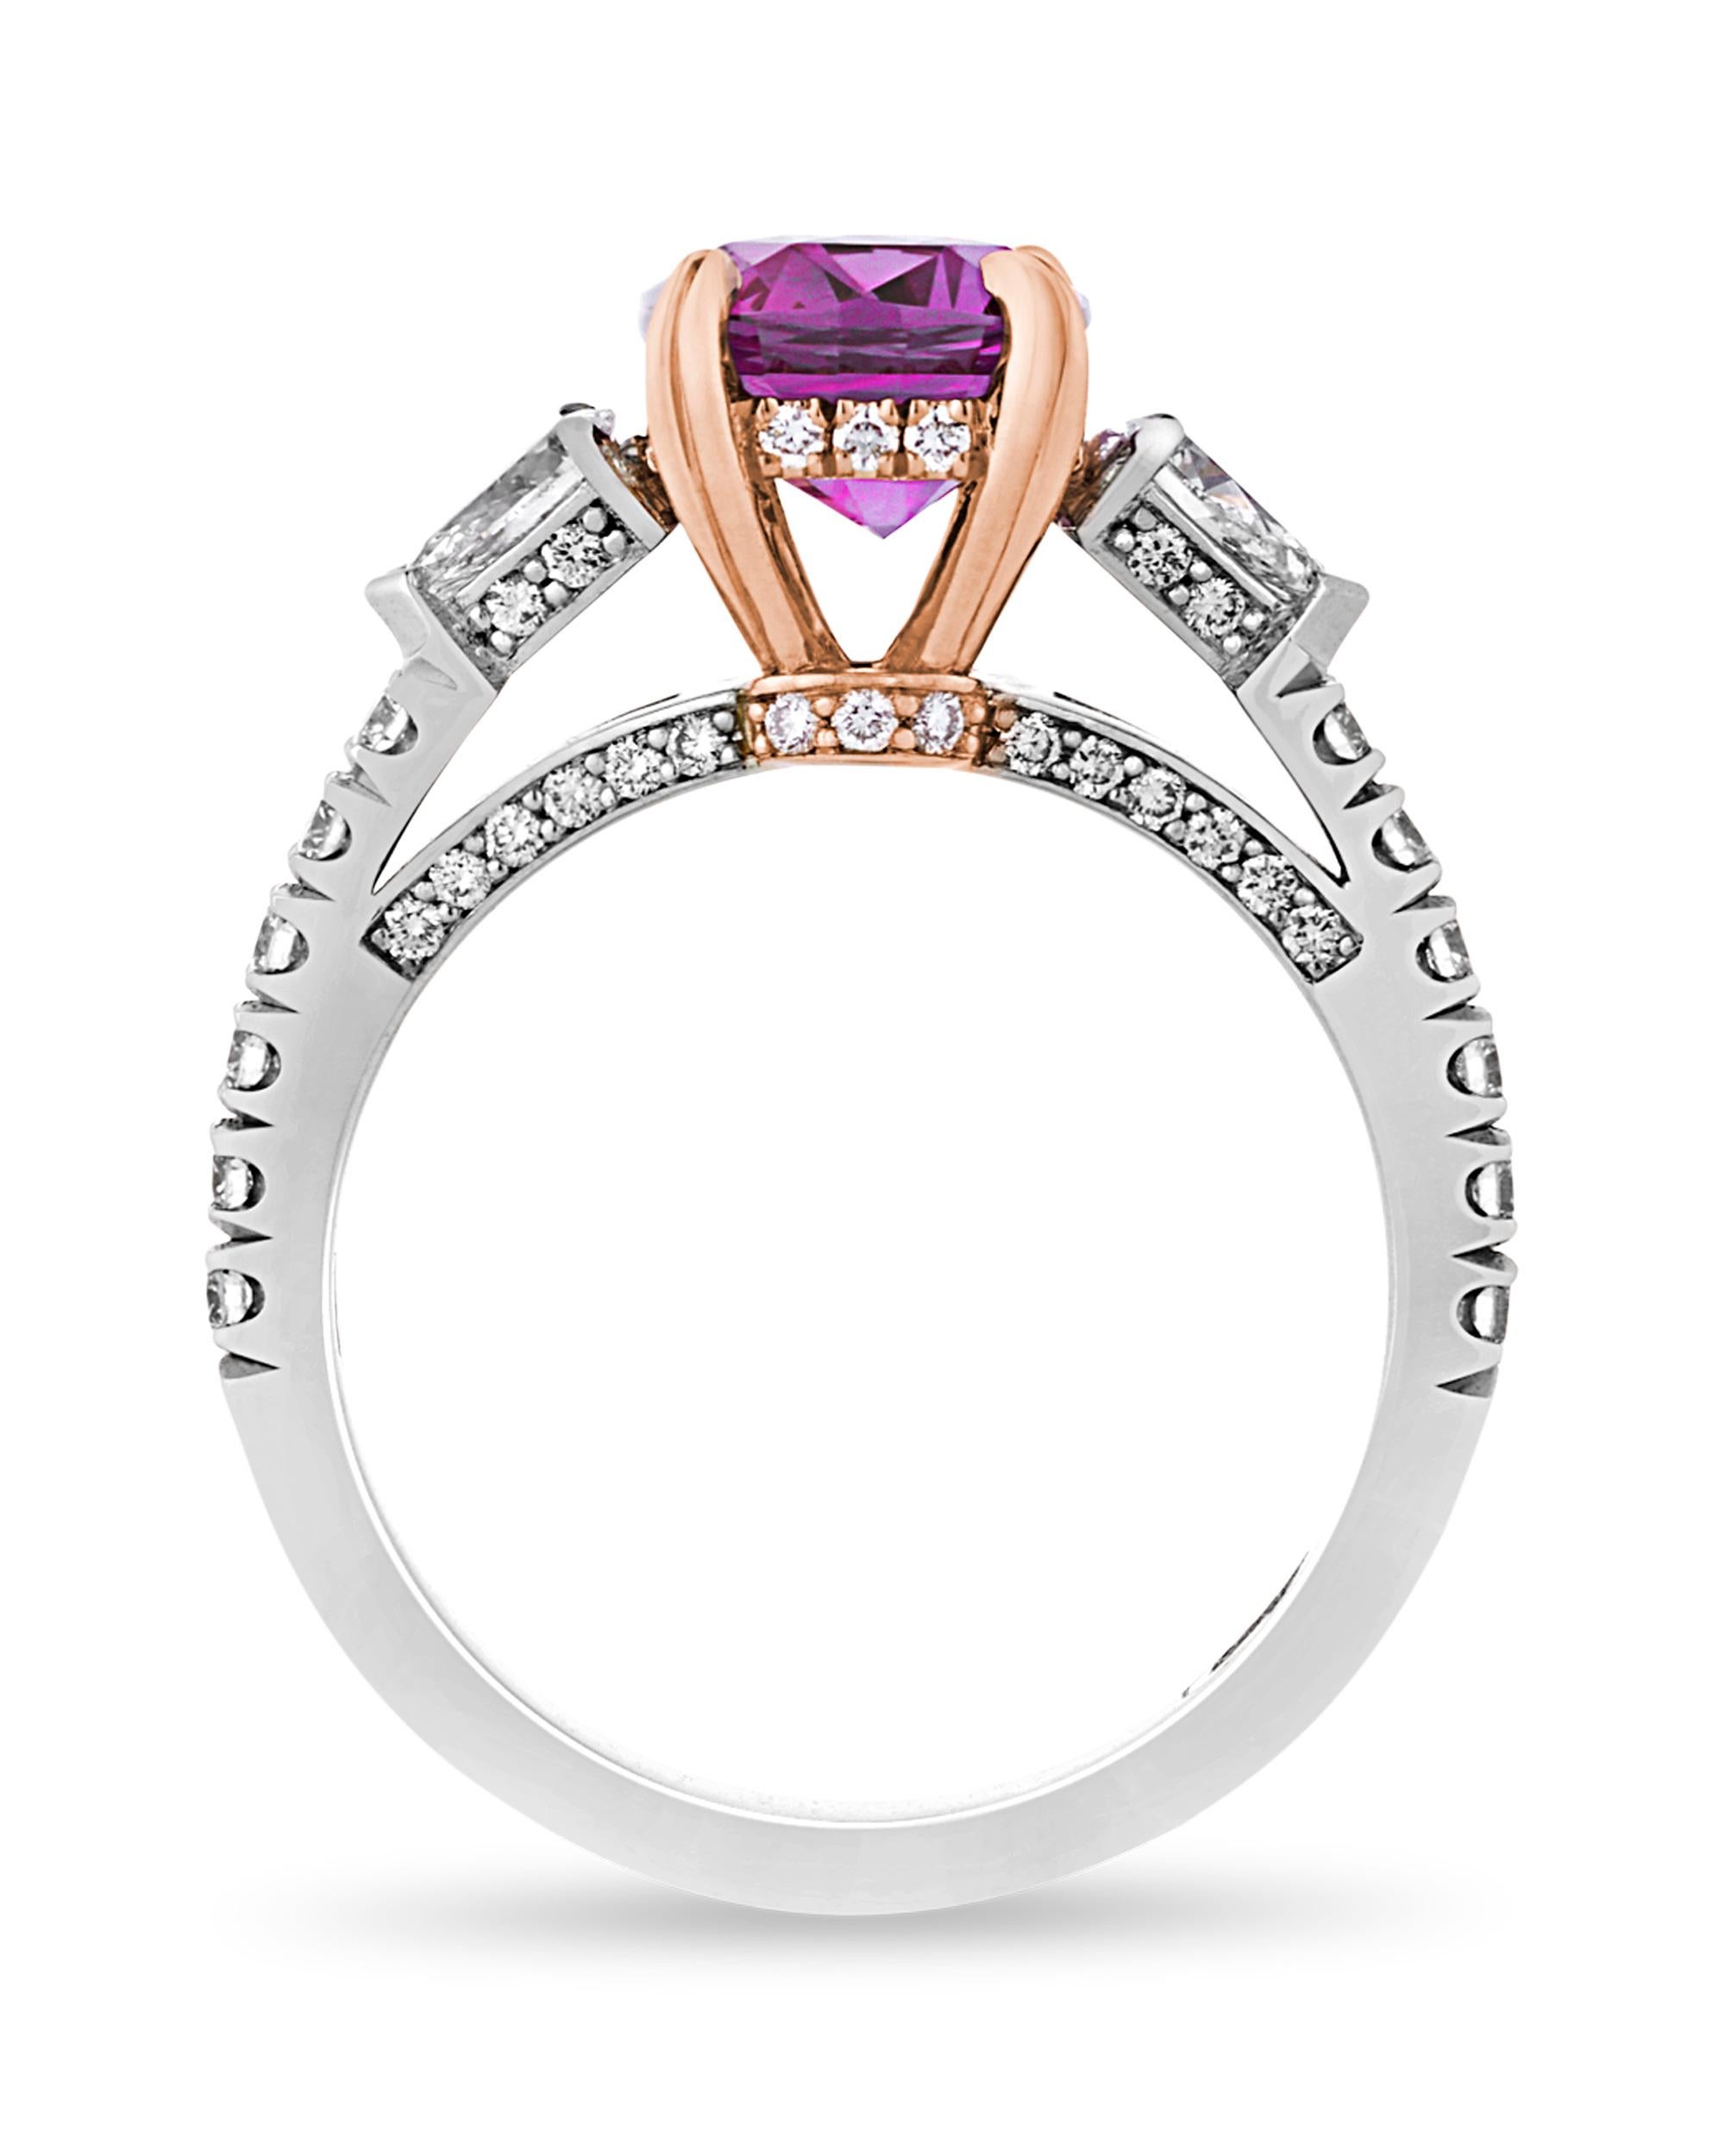 This breathtaking ring dazzles with a rare purple-hued “boysenberry” sapphire totaling 3.26 carats as its centerpiece. Stunning white diamonds totaling 0.84 carat surround the band, adding sparkle to this phenomenal sapphire. Taking its name from